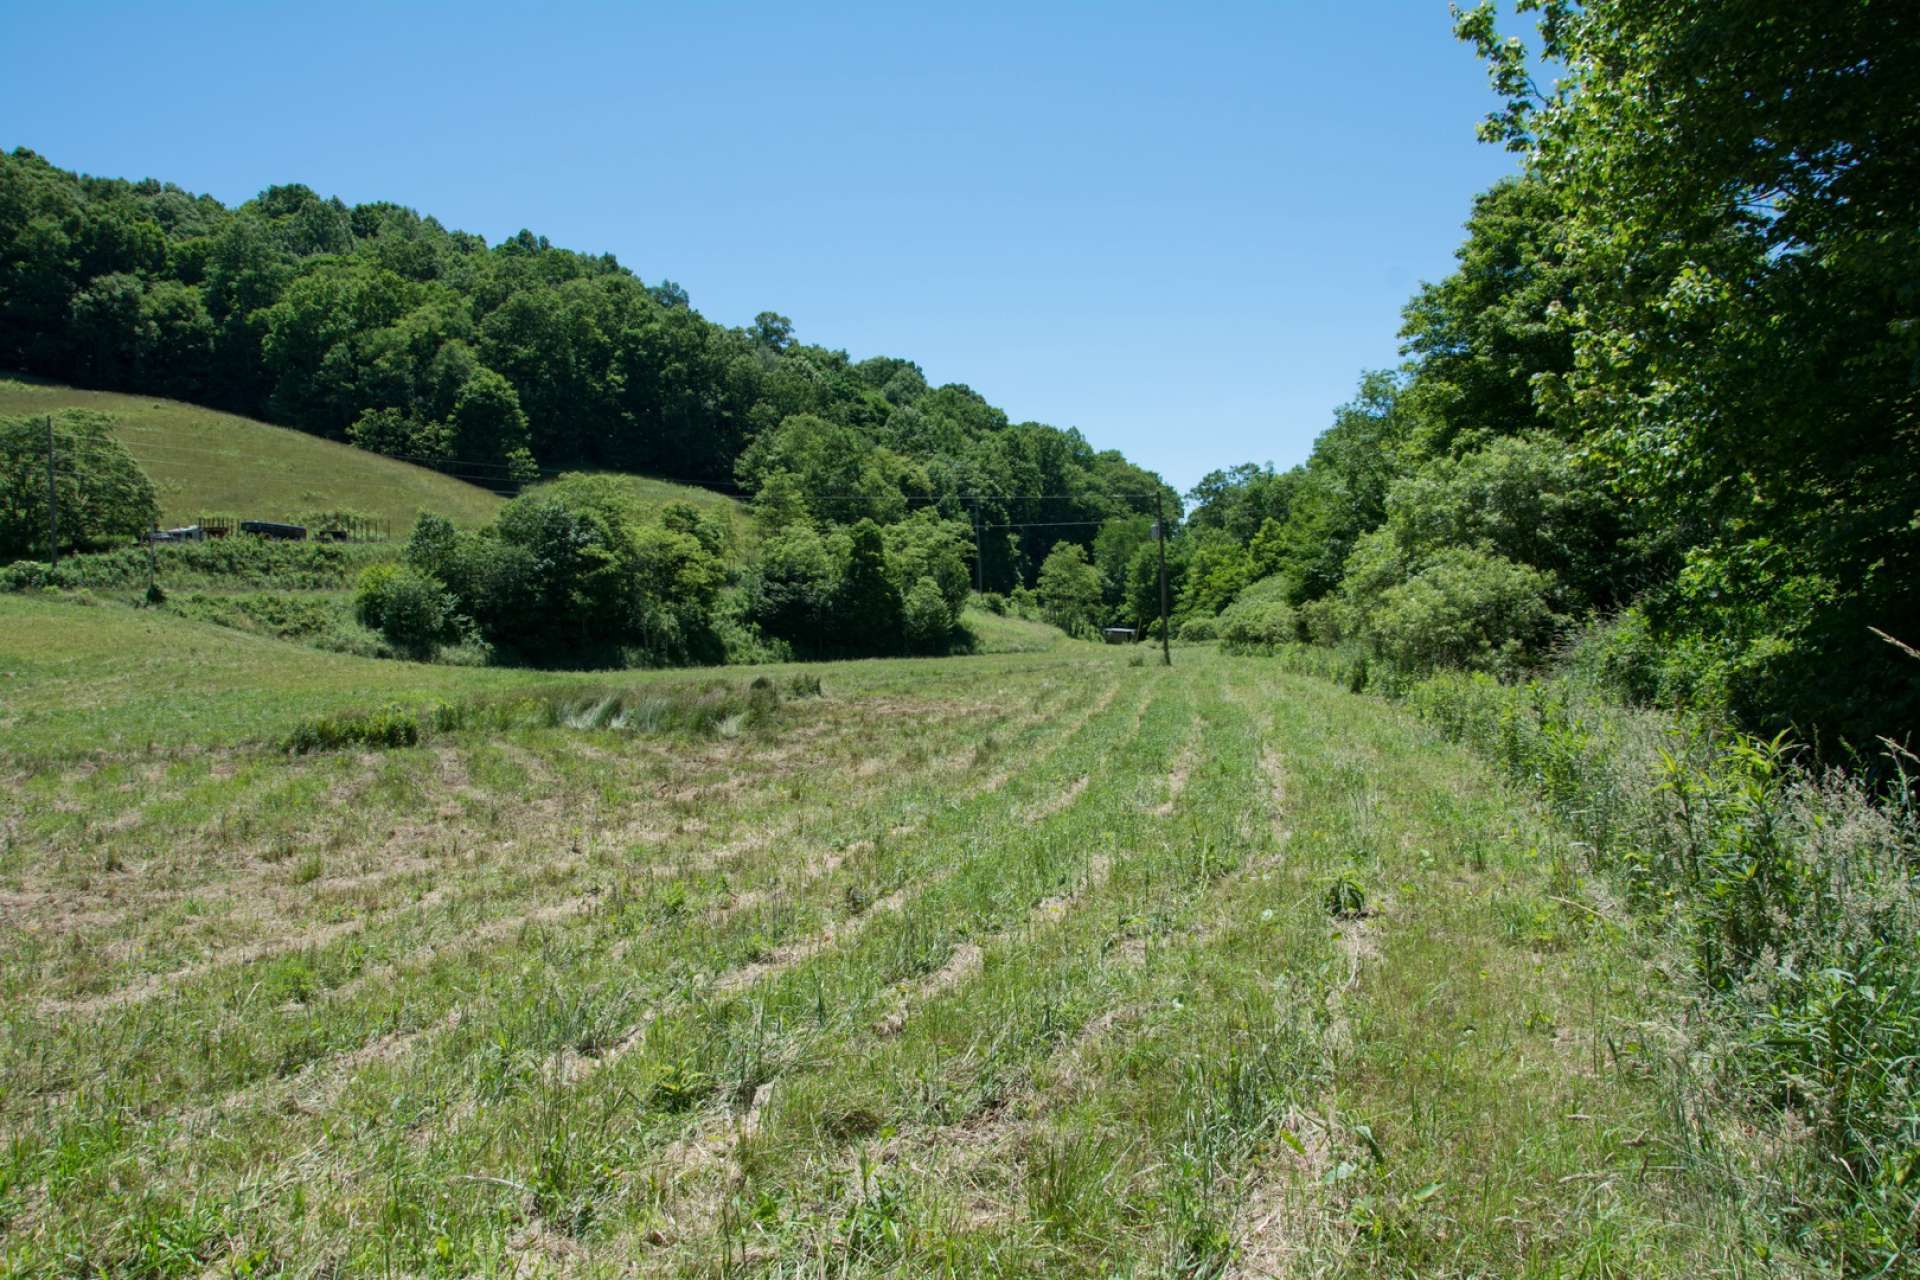 Fairly level meadows are ideal for crops or grazing. A vineyard project would also be probable here.